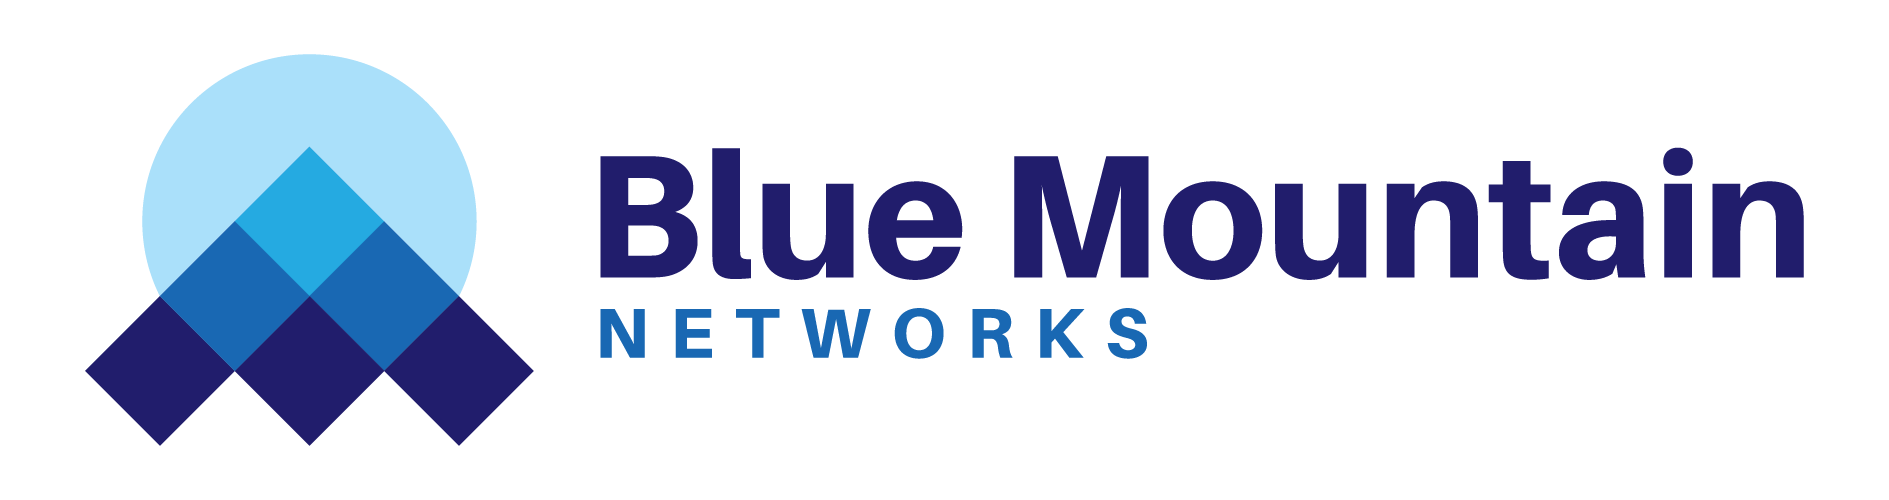 Blue Mountain Networks